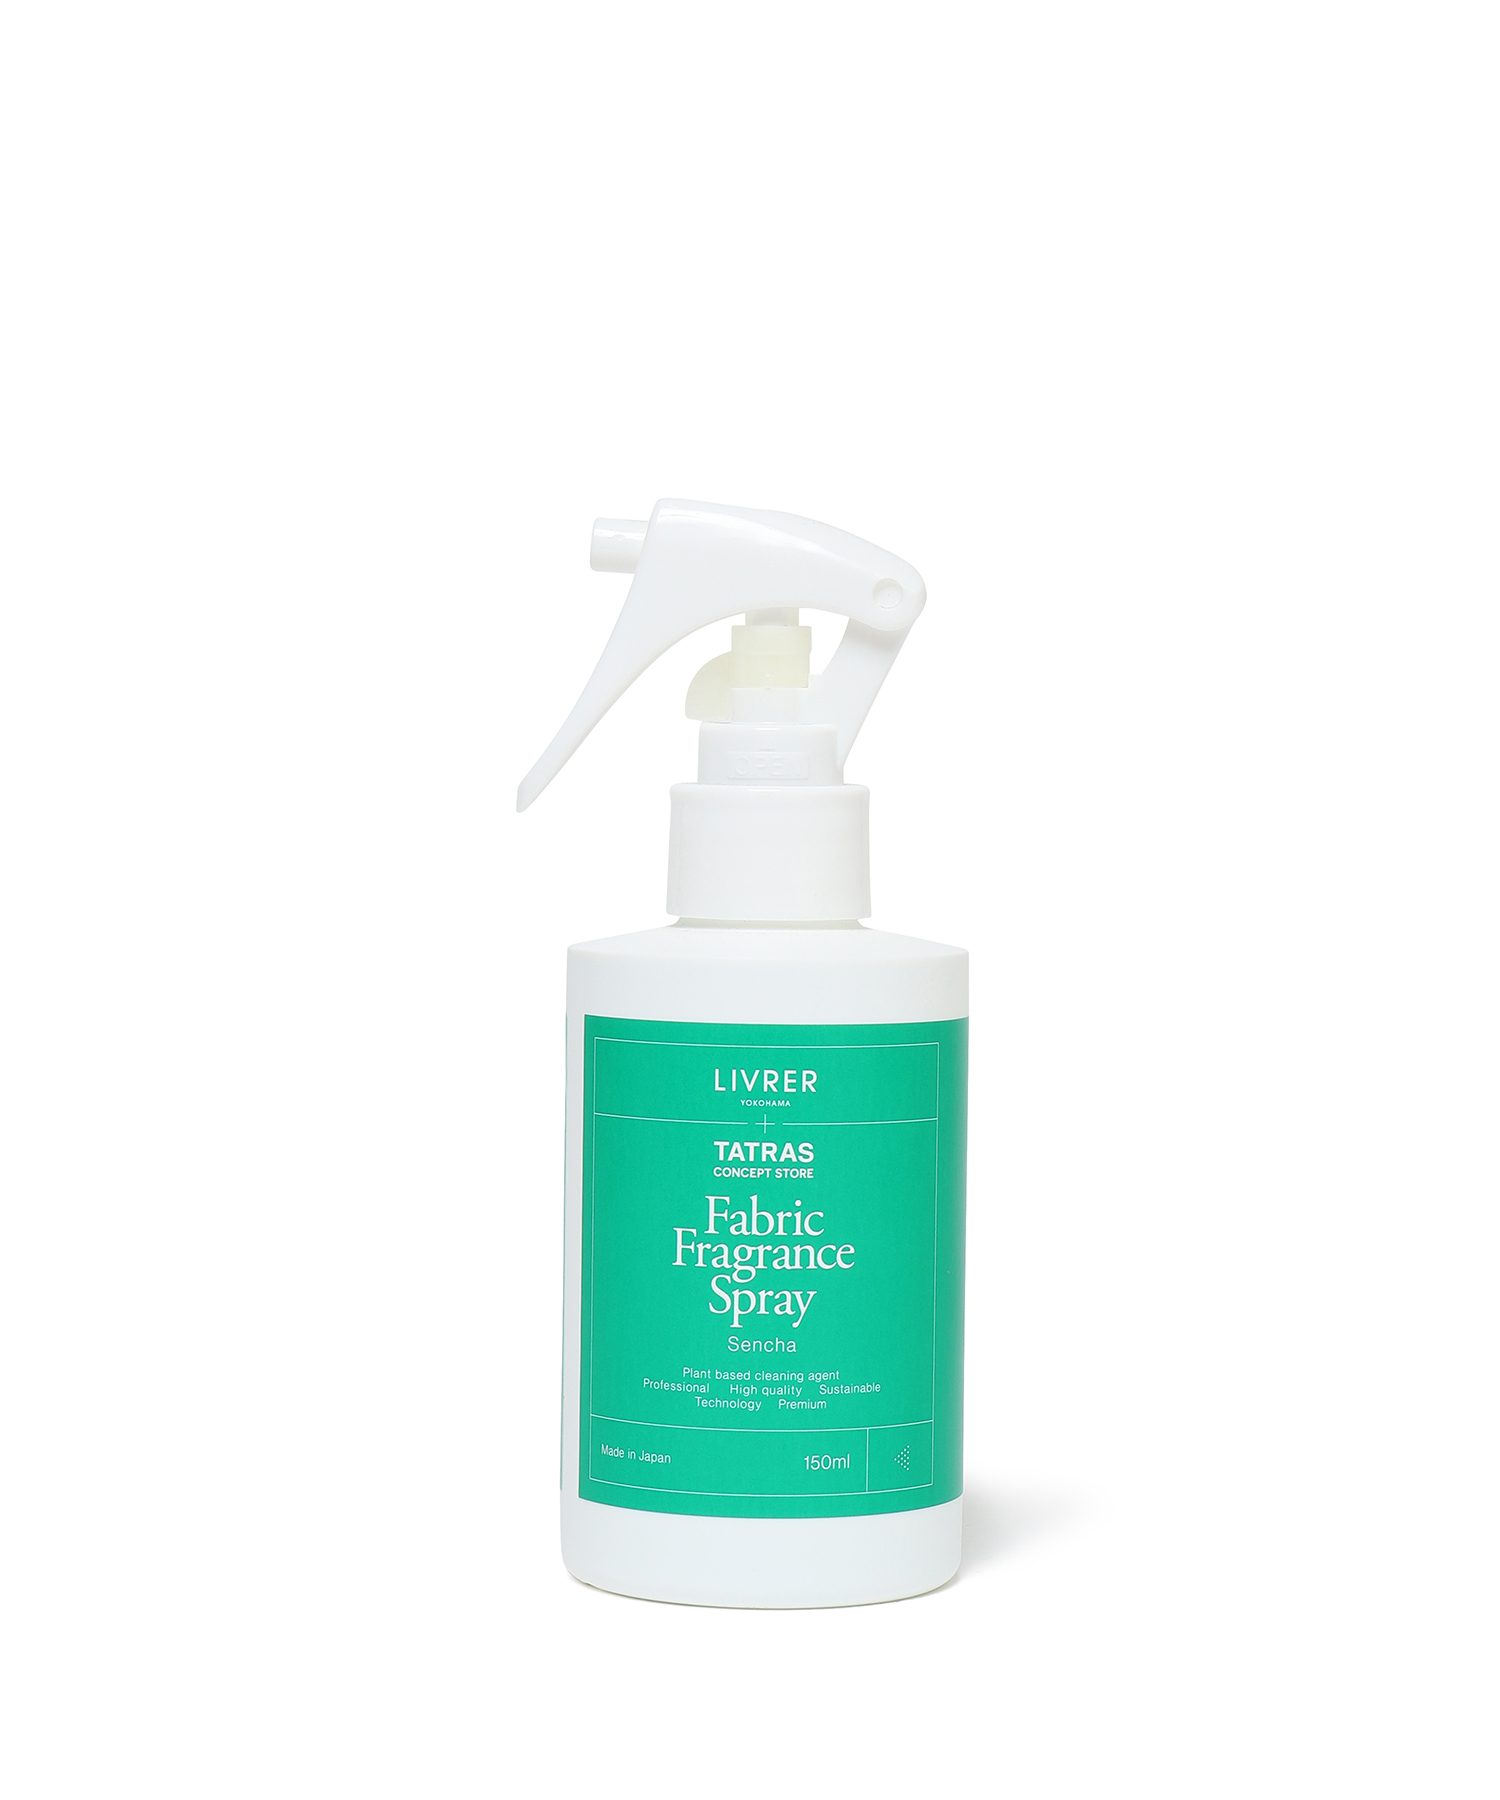 LIVRER-Exclucive THE FABRIC FREGRANCE SPRAY